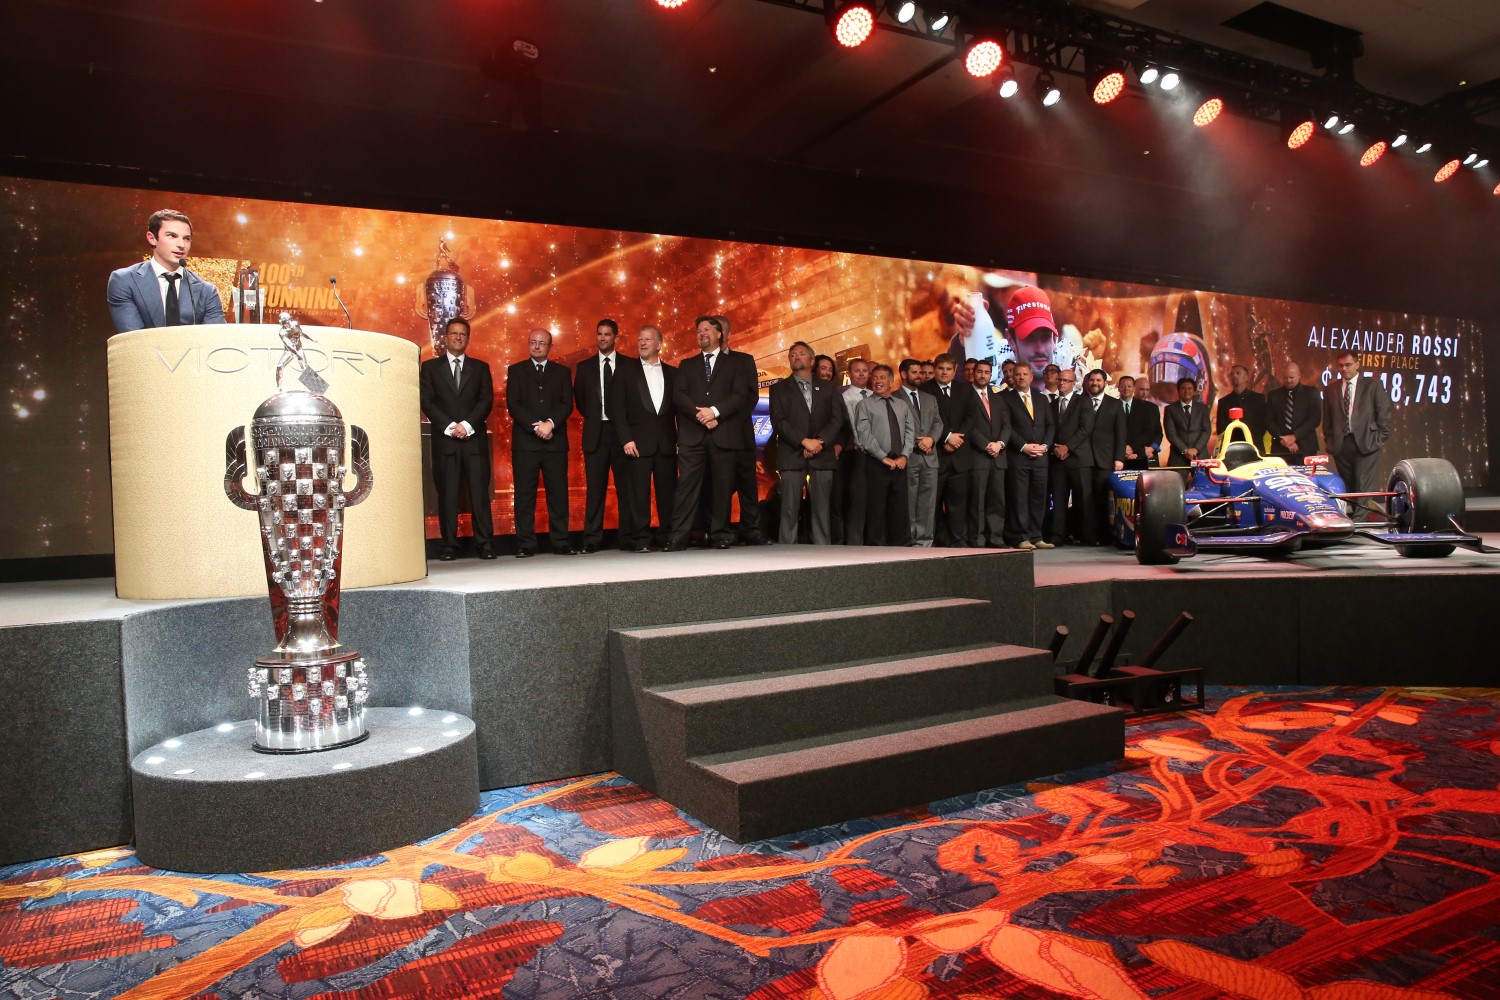 Rossi was joined on stage by his winning car and team.Rossi was joined on stage by his winning car and team